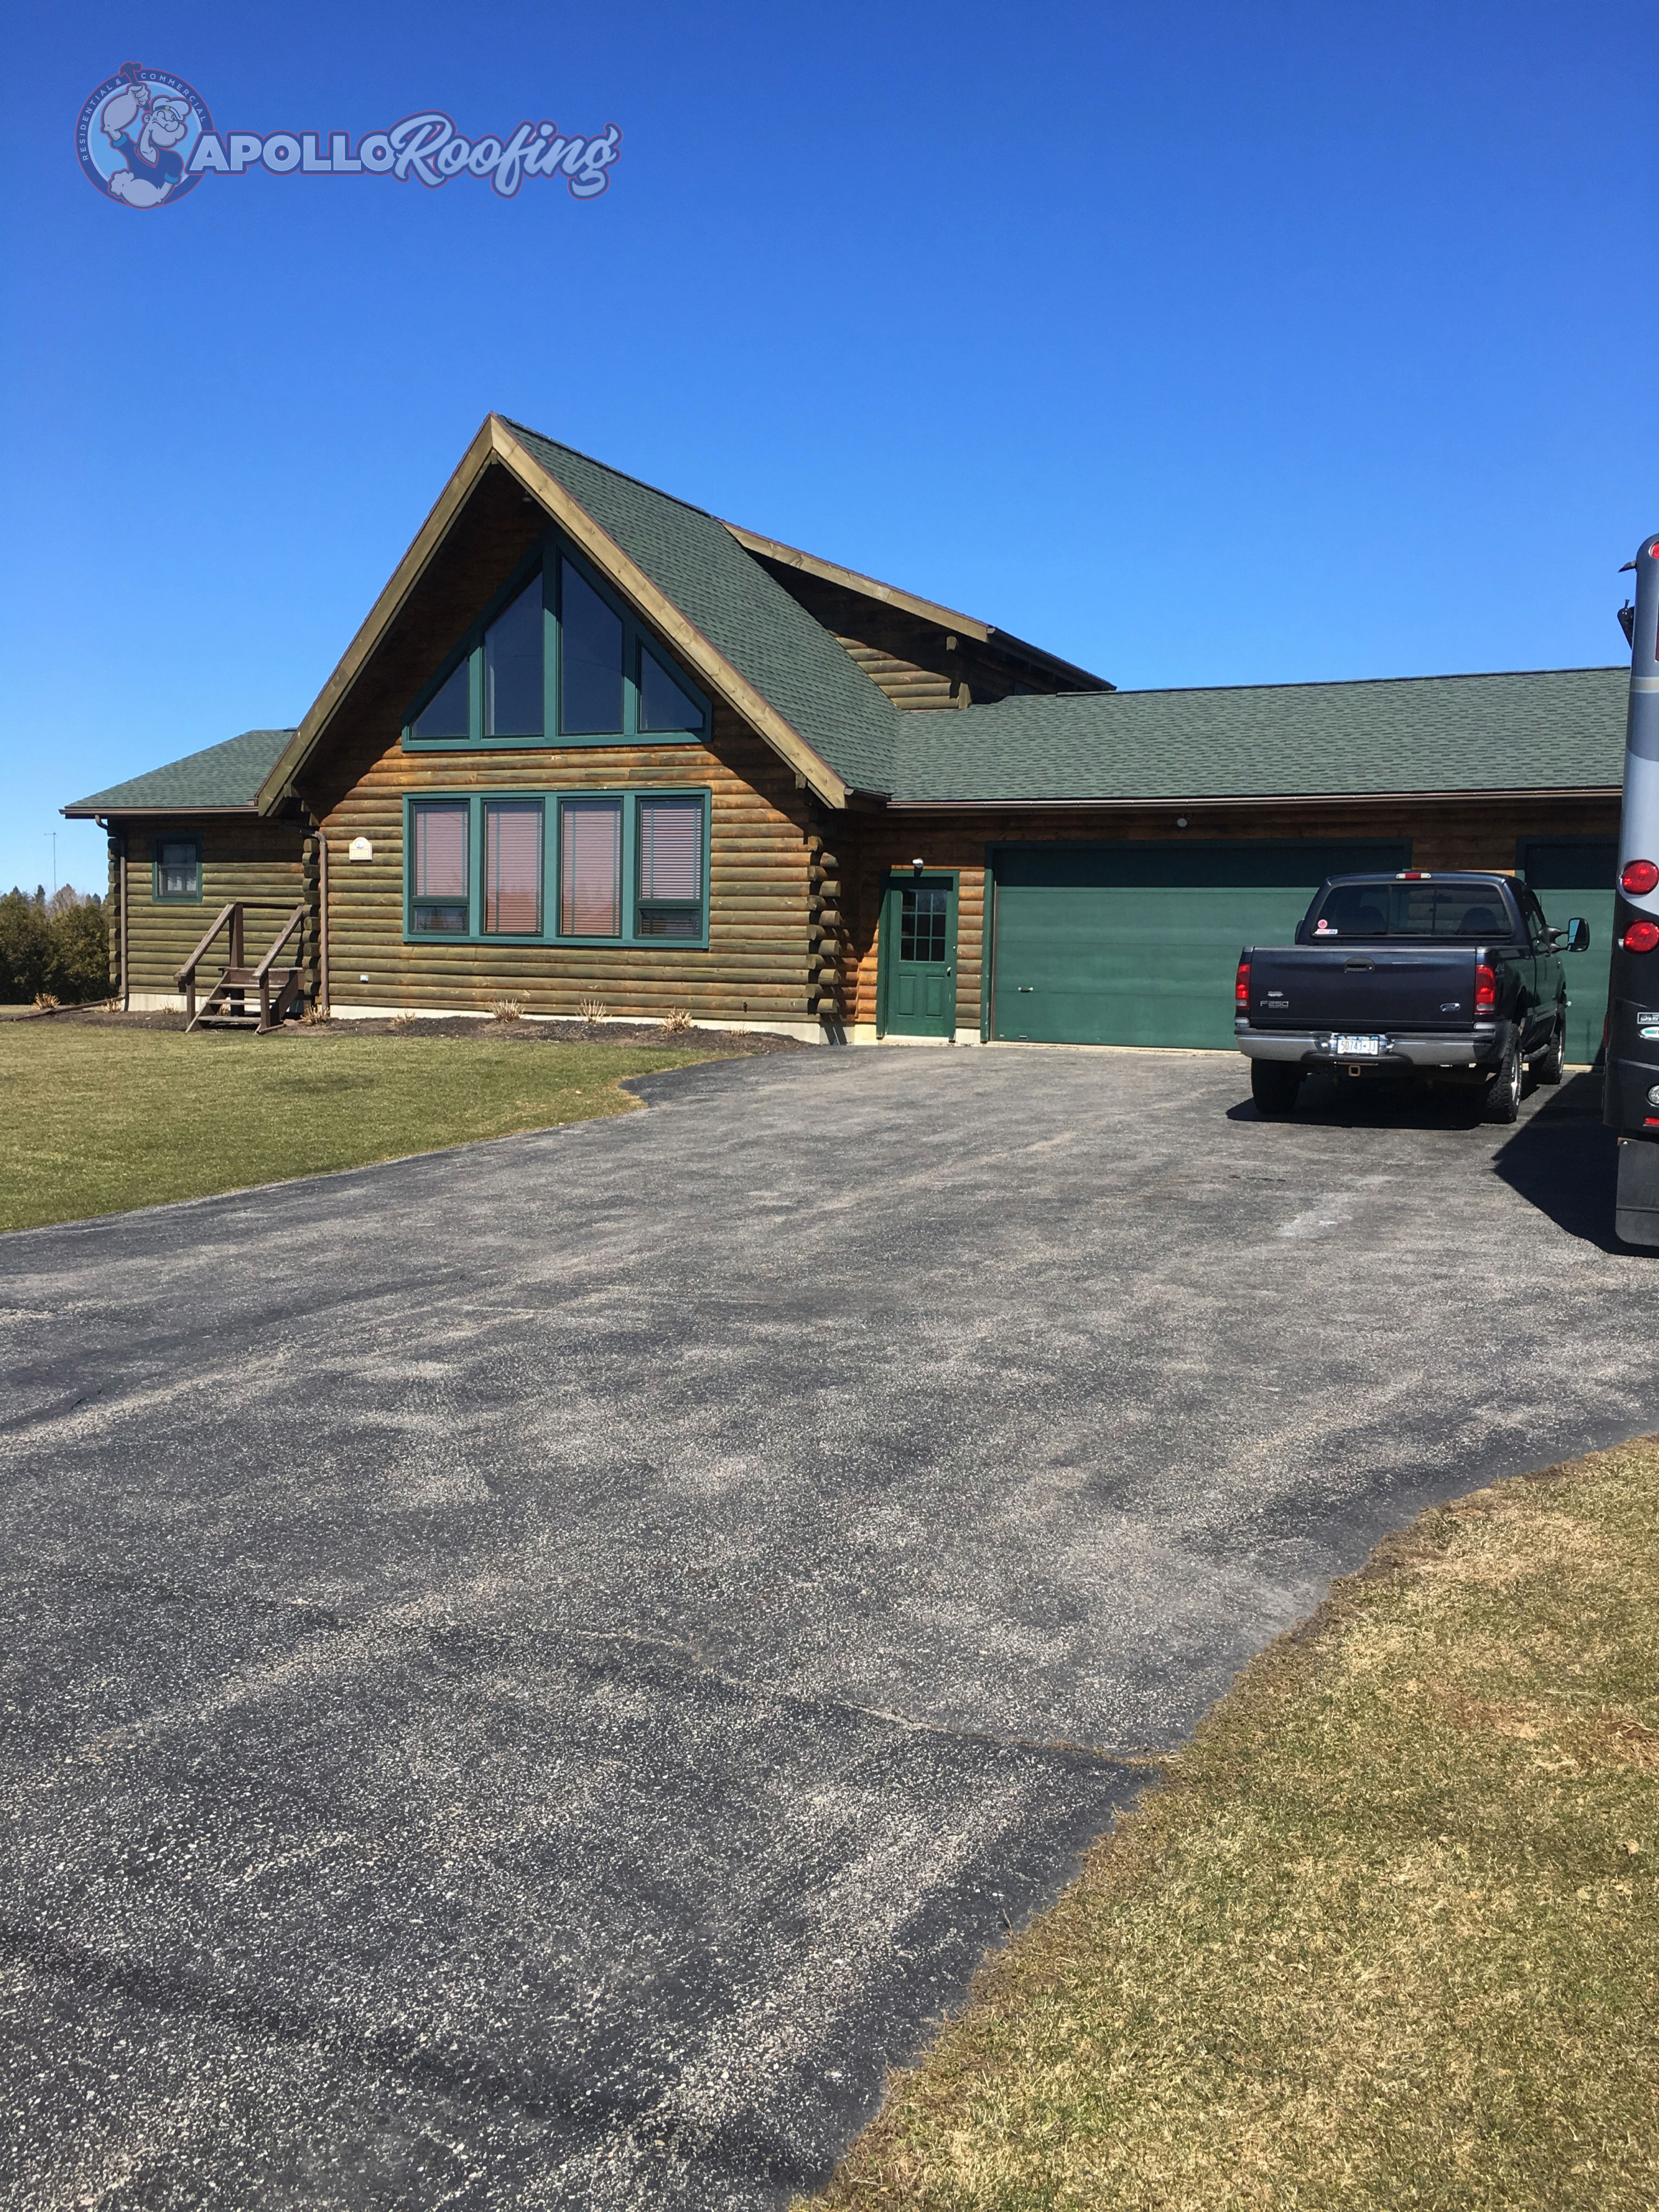 Apollo Roofing Webster NY (5)